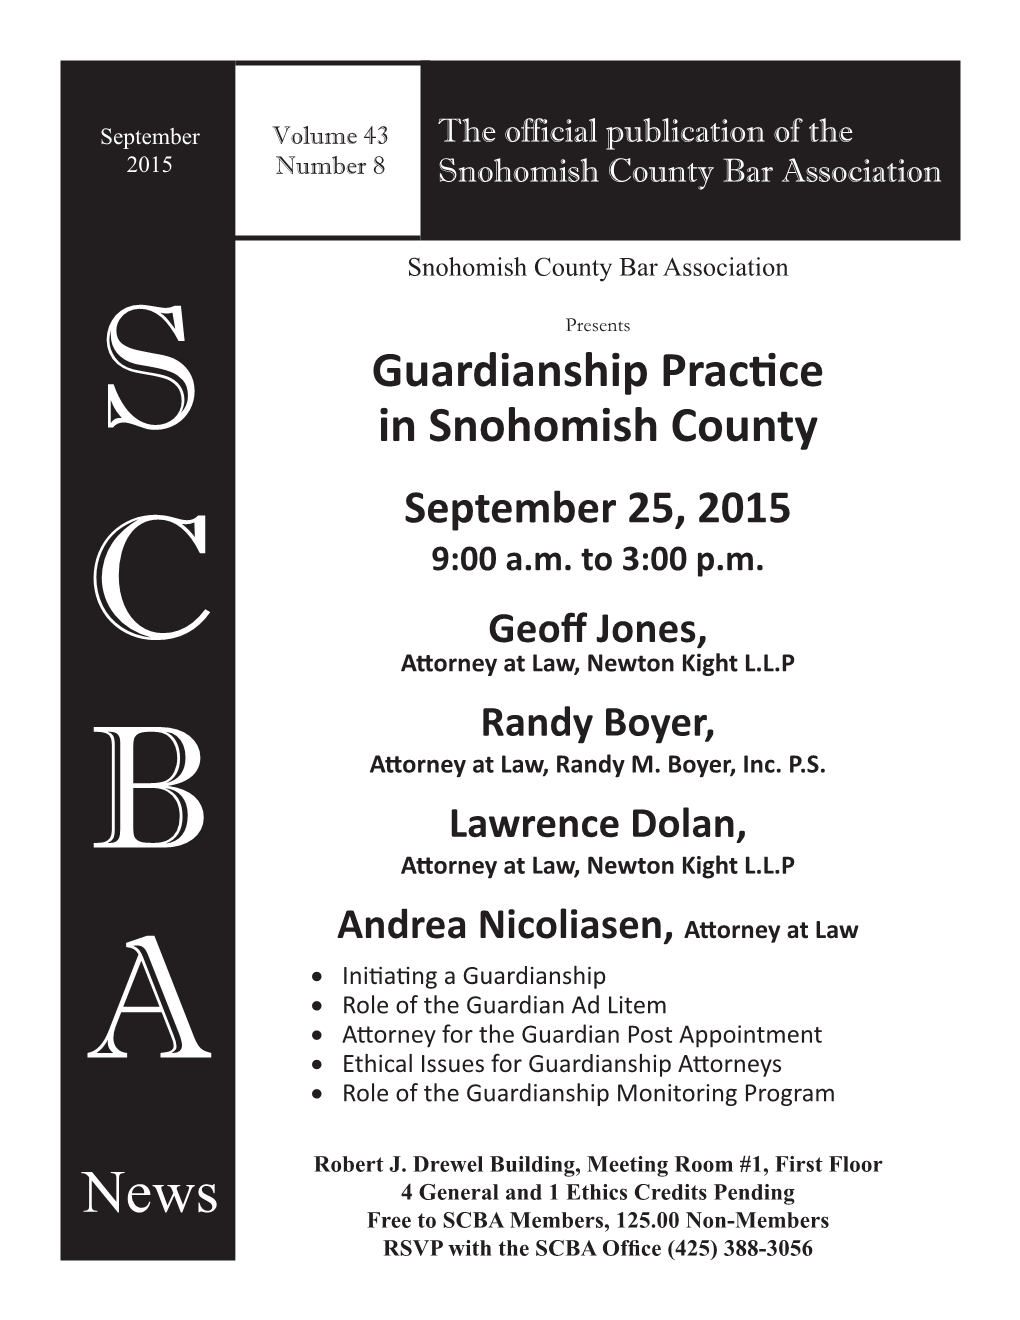 Guardianship Practice in Snohomish County